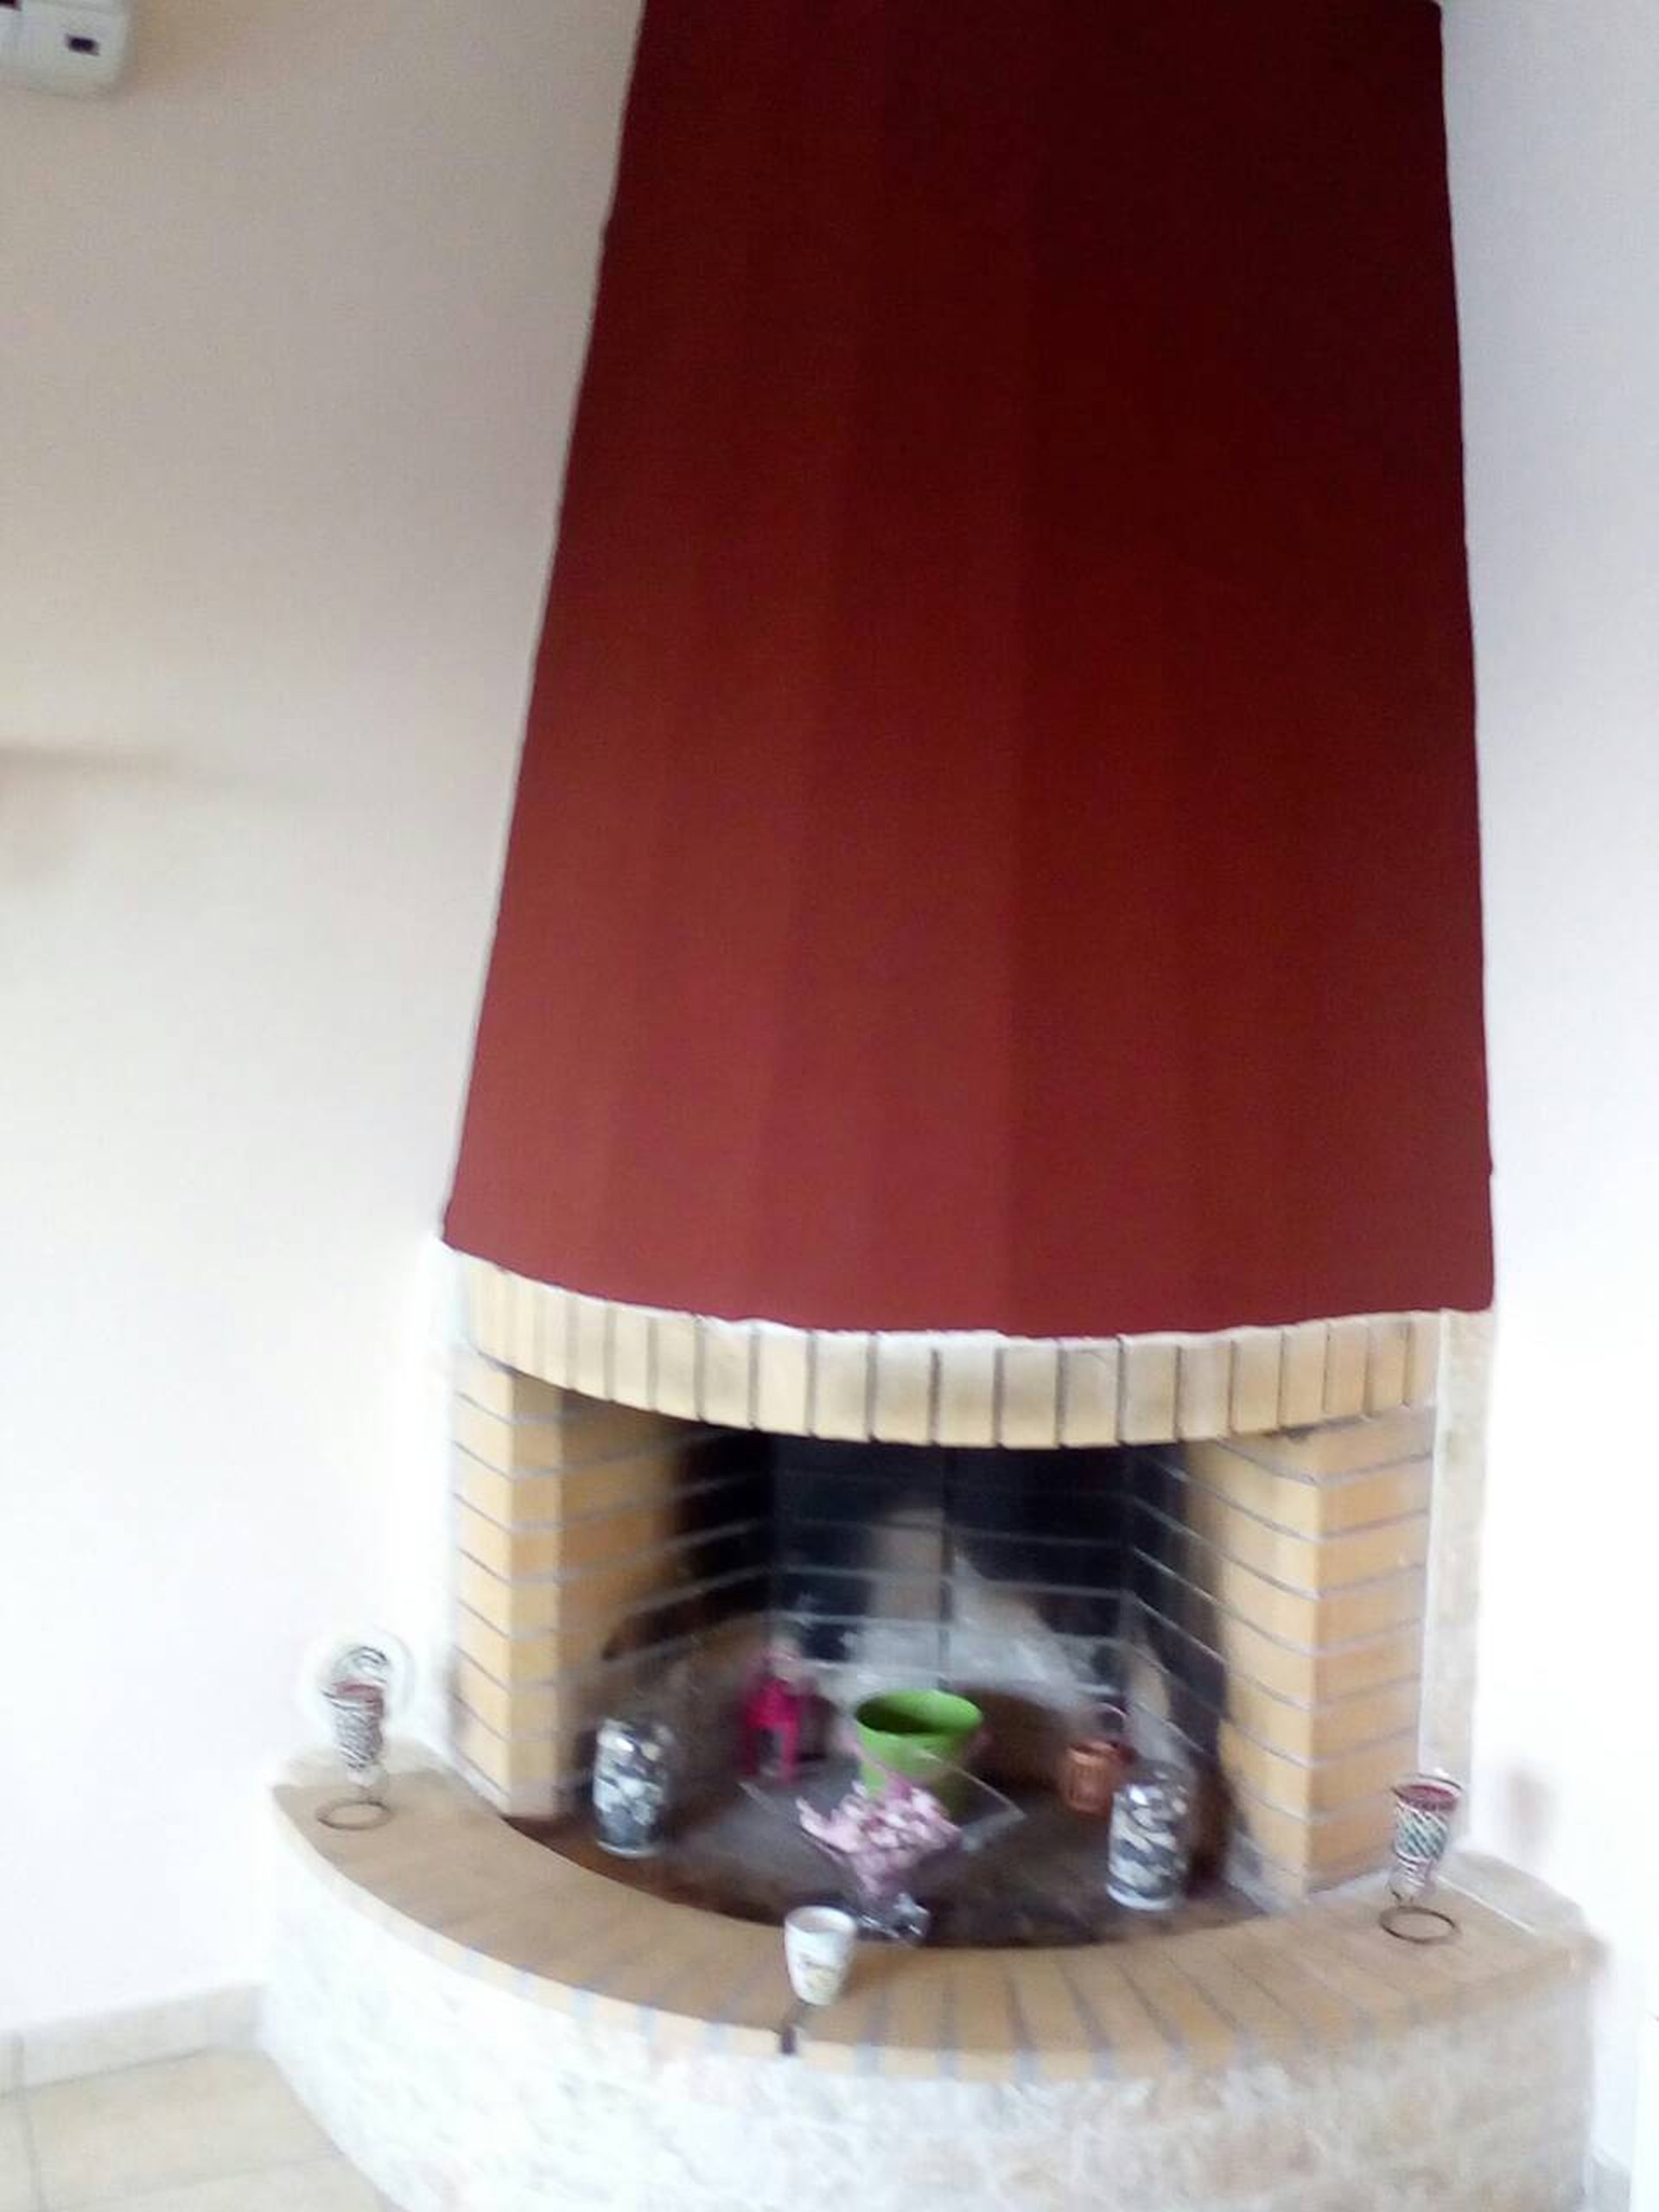 picture plazza fire place